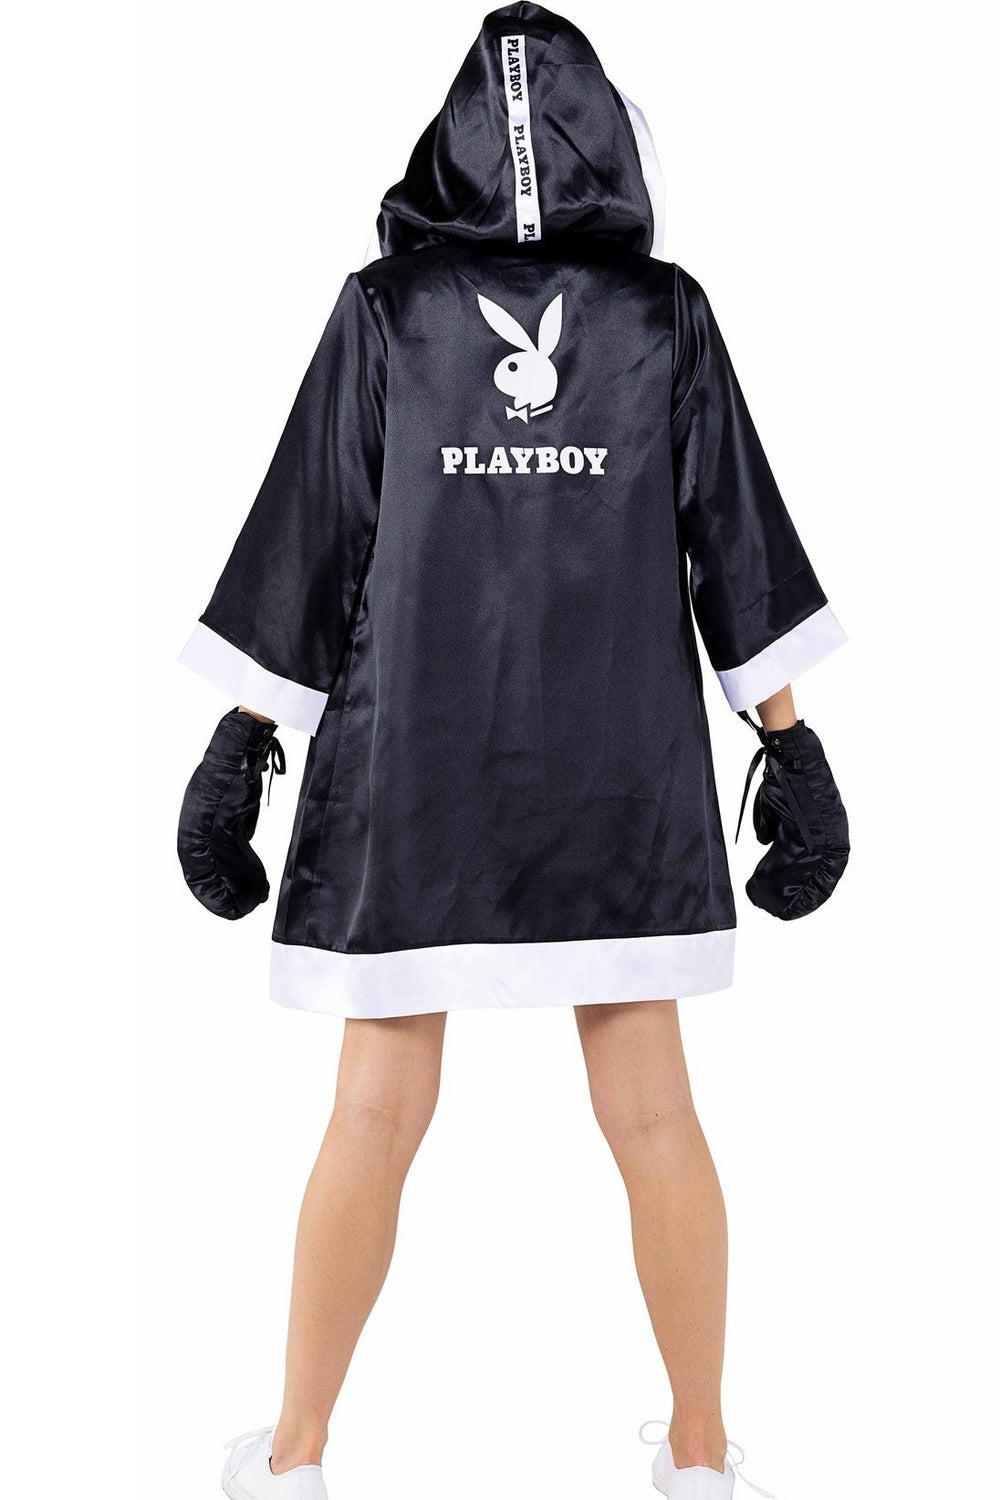 Playboy Knock-Out Boxer Costume-Other Costumes-Roma Costumes-SEXYSHOES.COM